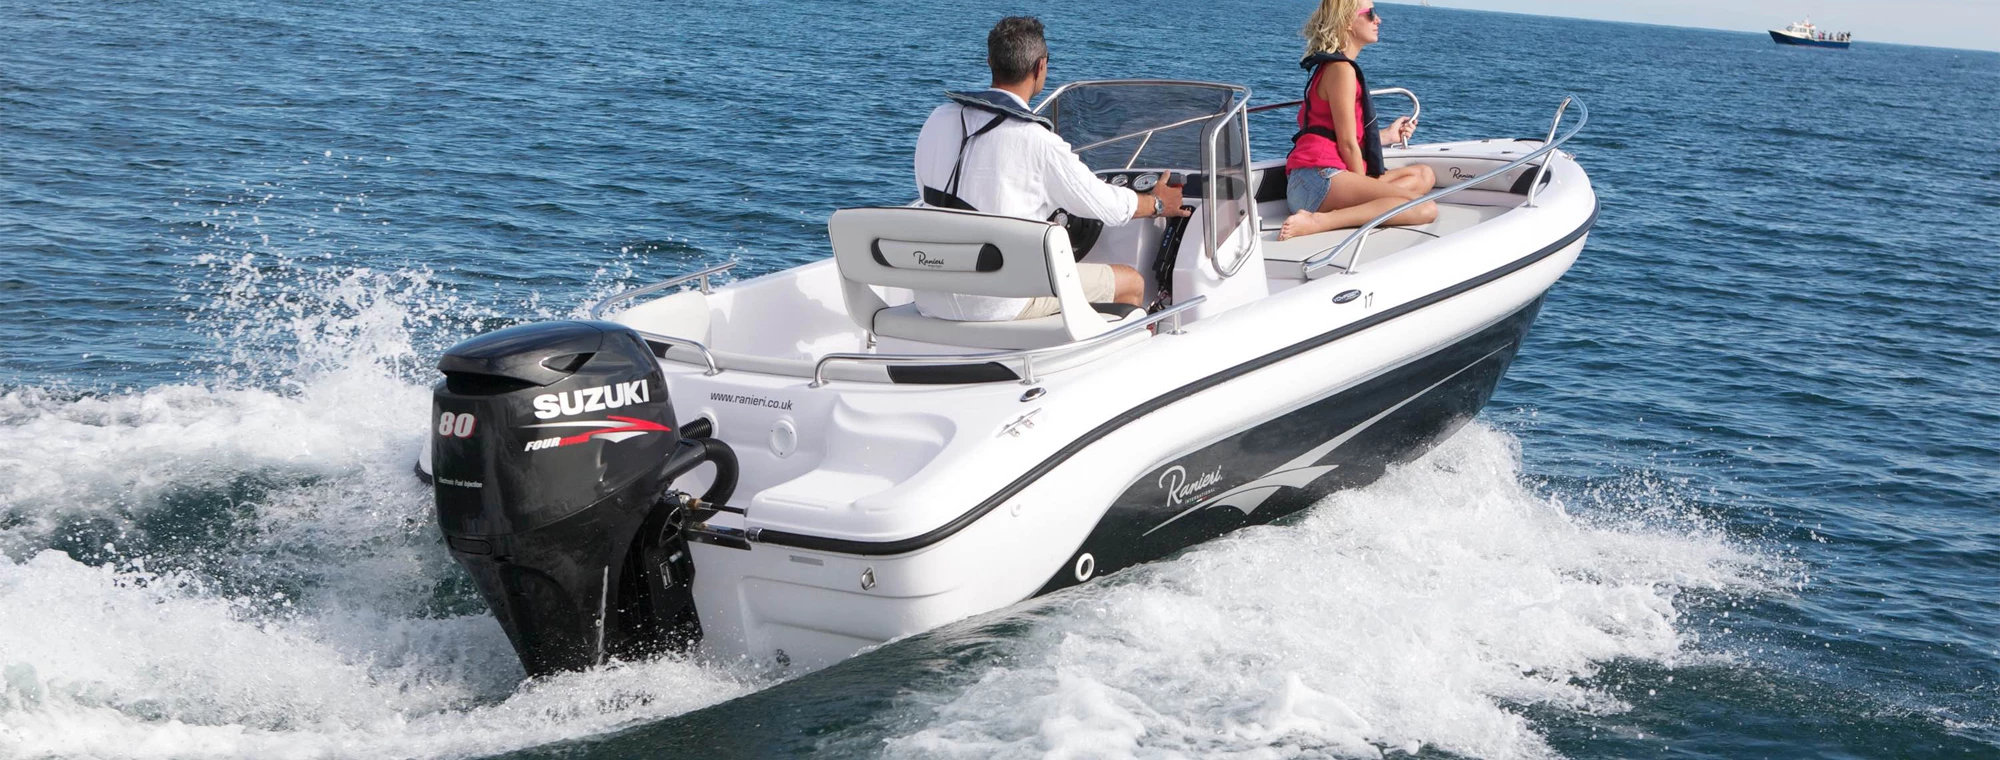 Boat out at sea with a DF80A outboard